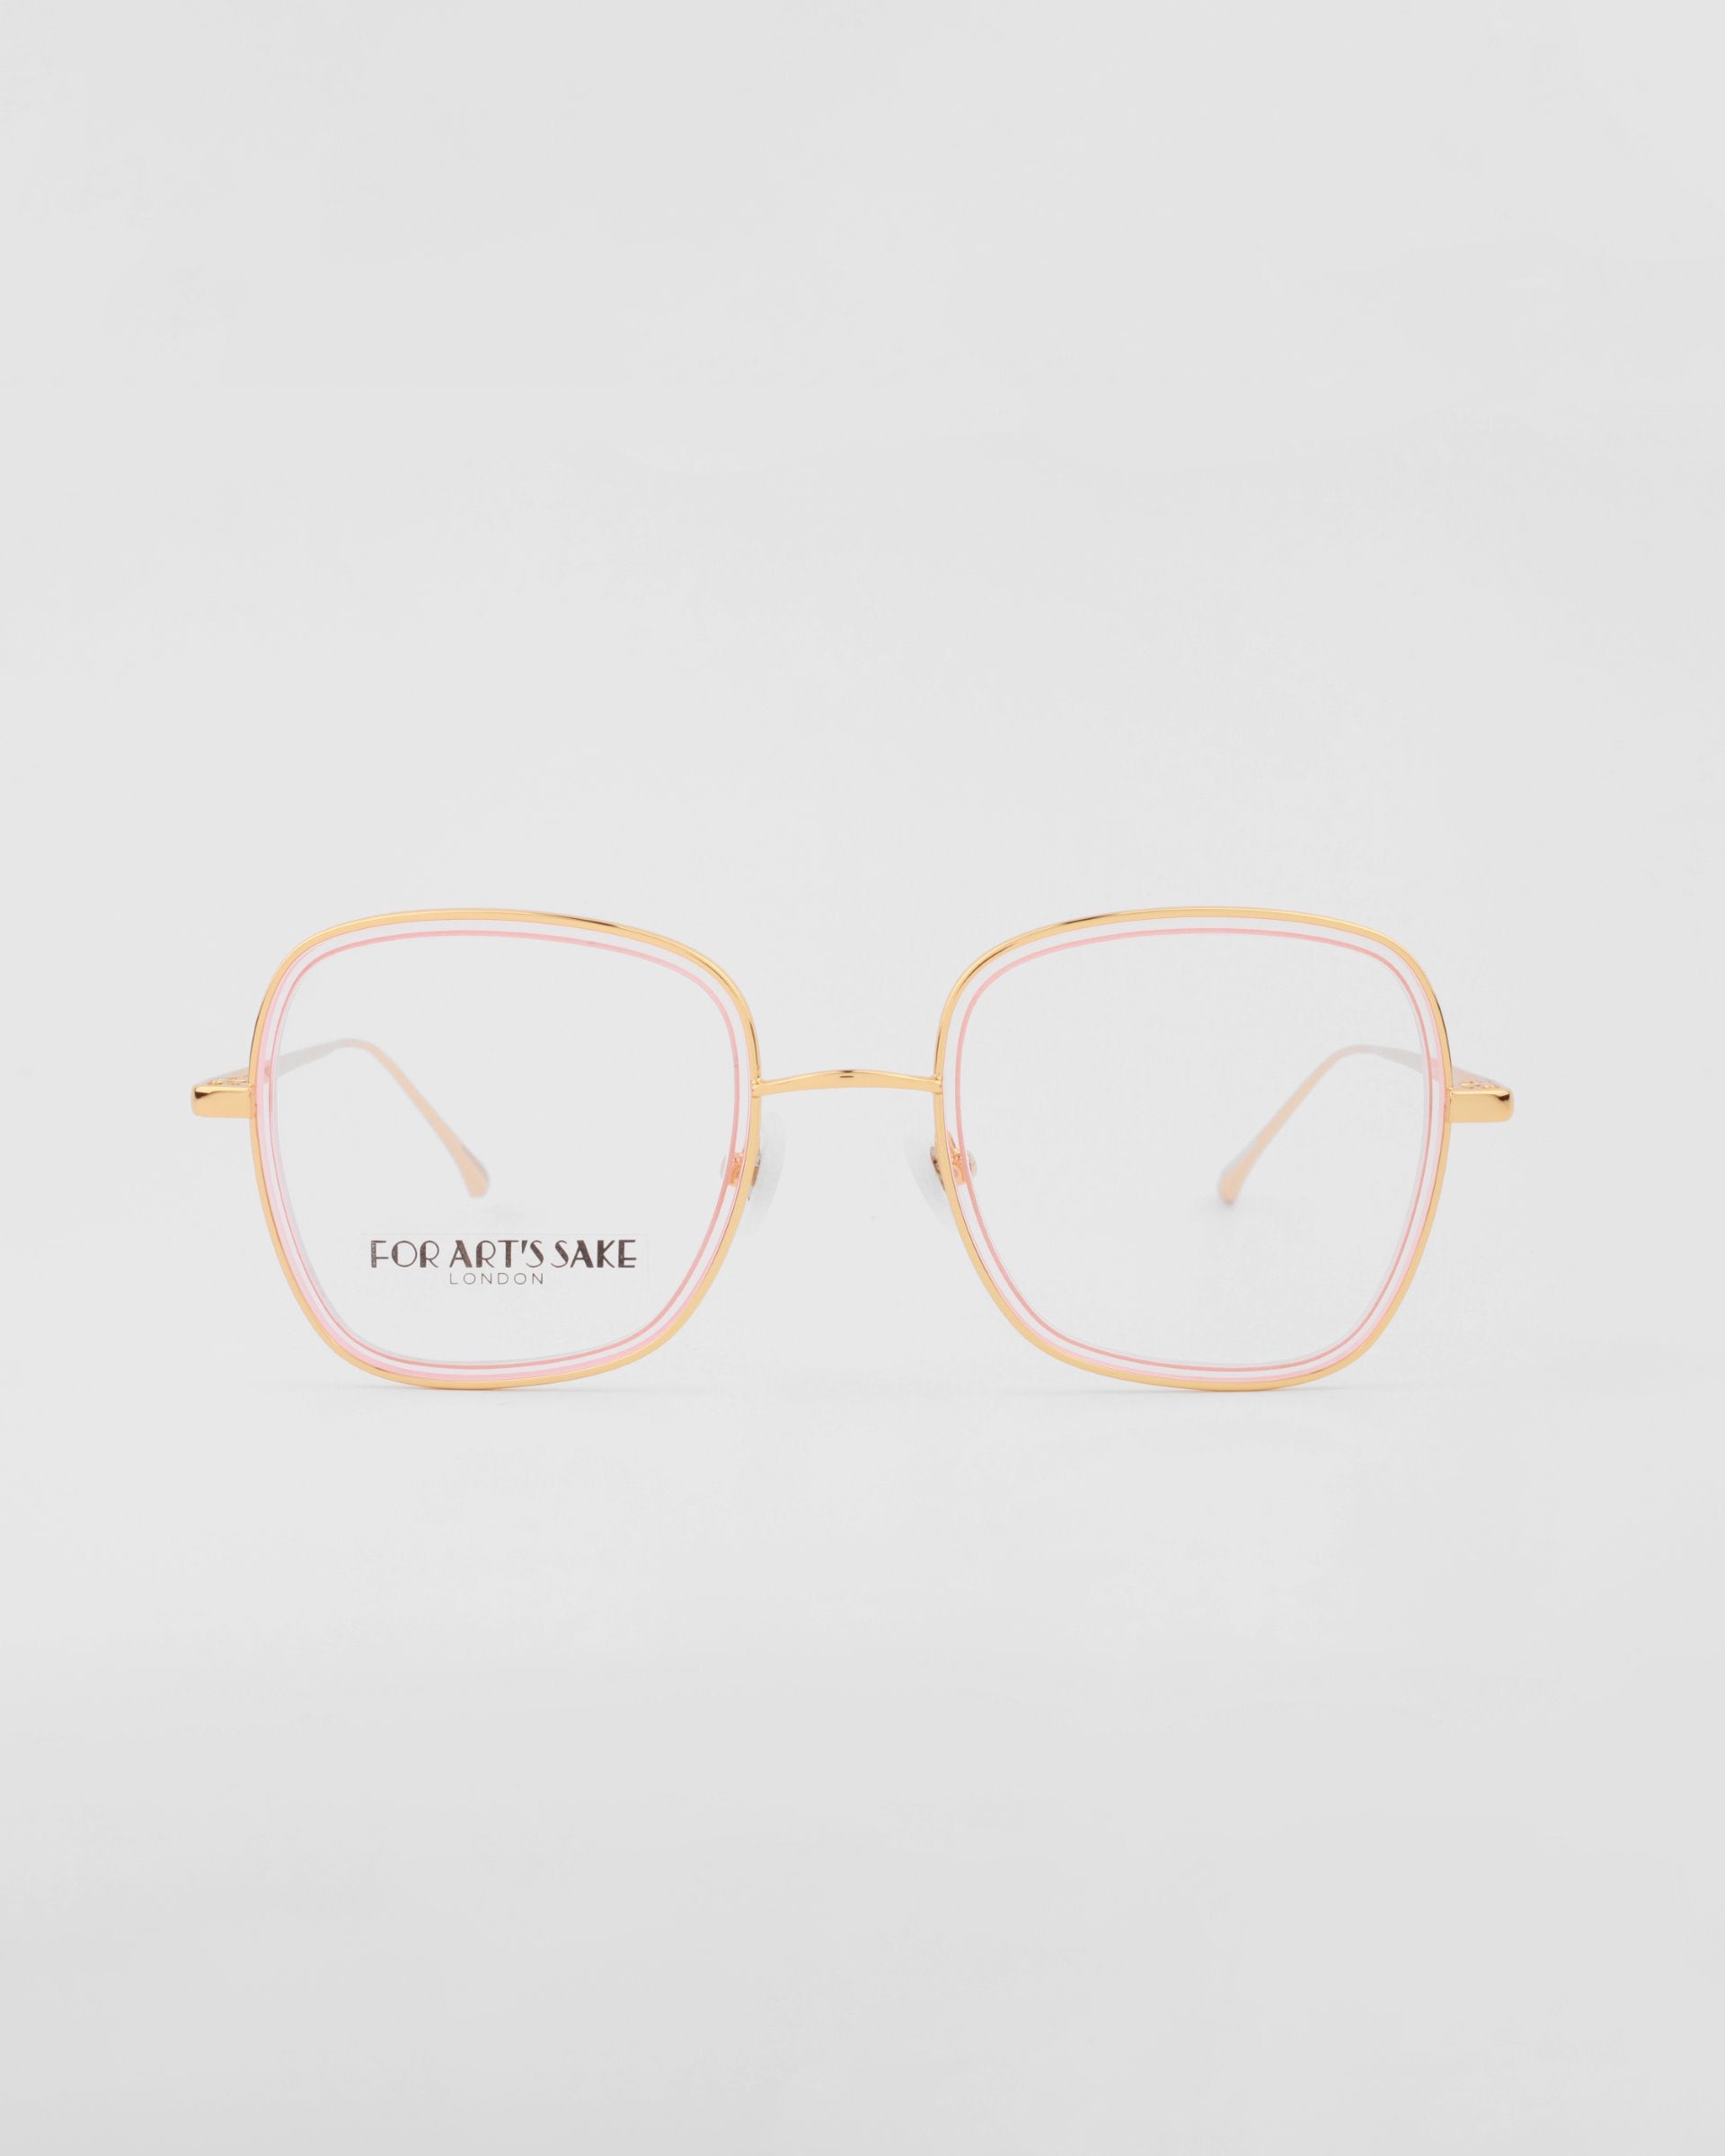 A pair of eyeglasses with thin, 18-karat gold-plated frames and a hint of pink detailing around the rims. The shape of the lenses is a rounded square, equipped with a blue light filter. The brand &quot;For Art&#39;s Sake®&quot; is printed on the left lens. The background is white. This stylish accessory is named Coconut by For Art&#39;s Sake®.